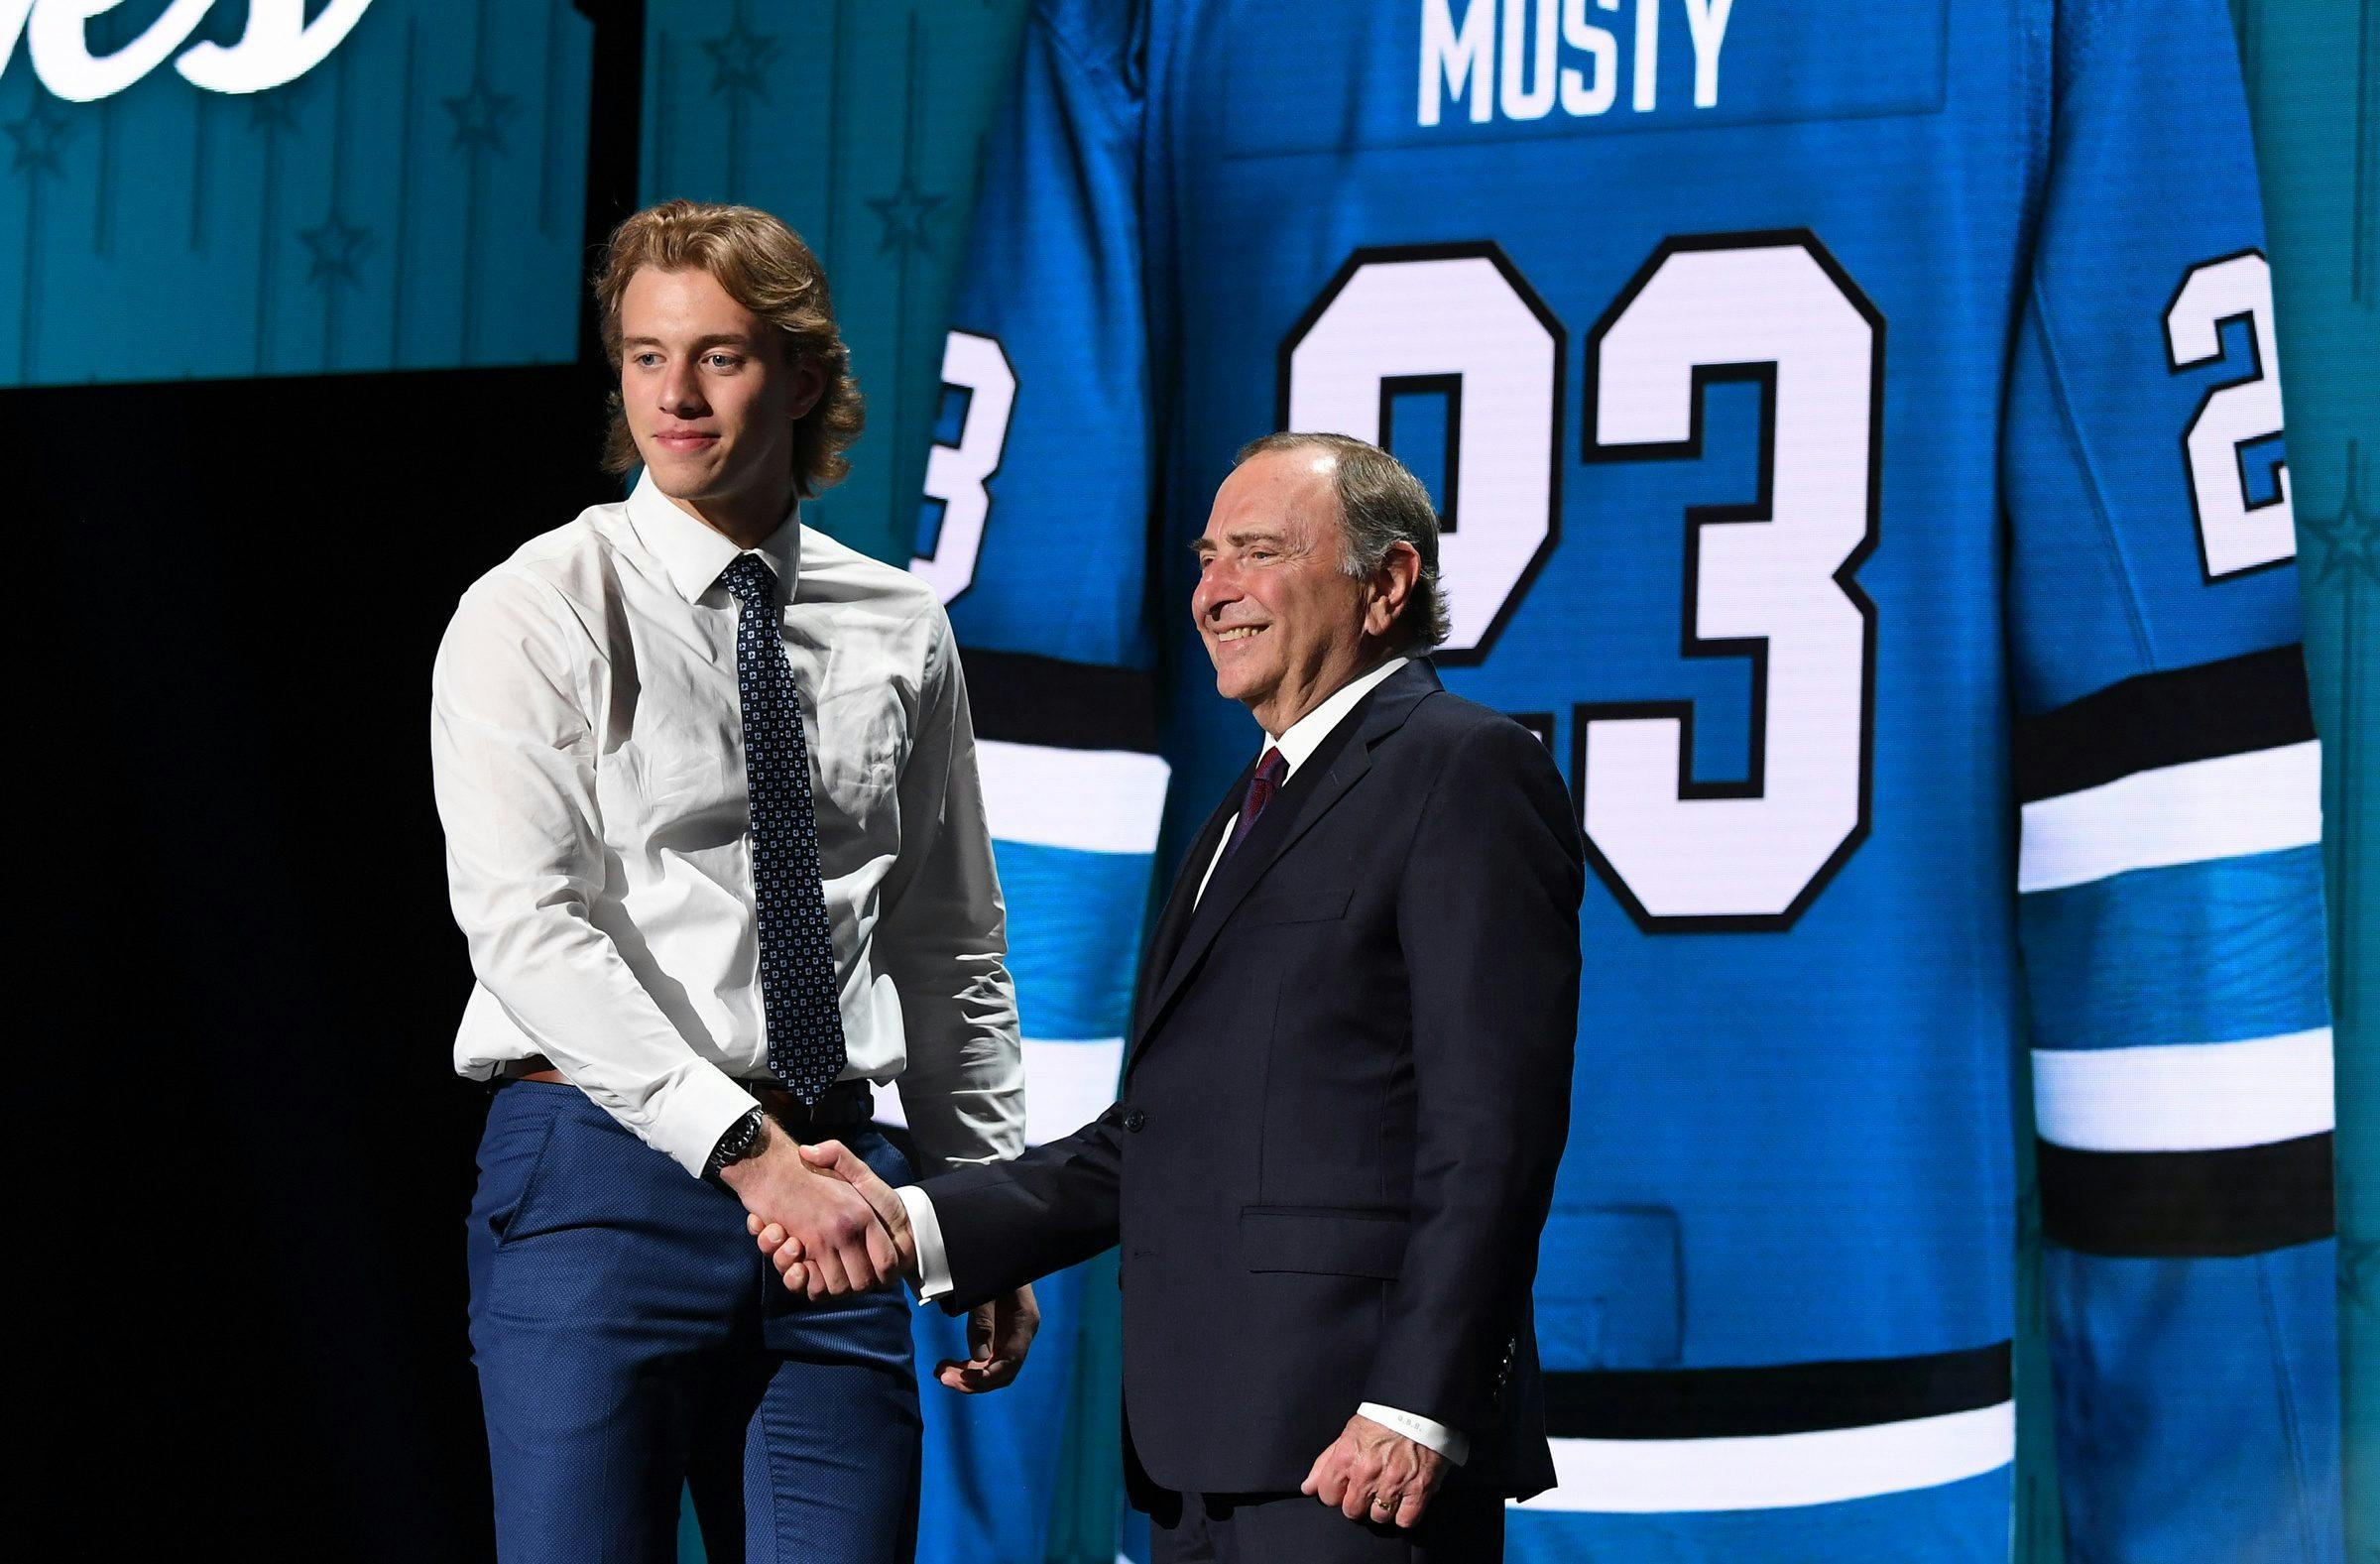 San Jose Sharks sign Quentin Musty of Sudbury Wolves to contract